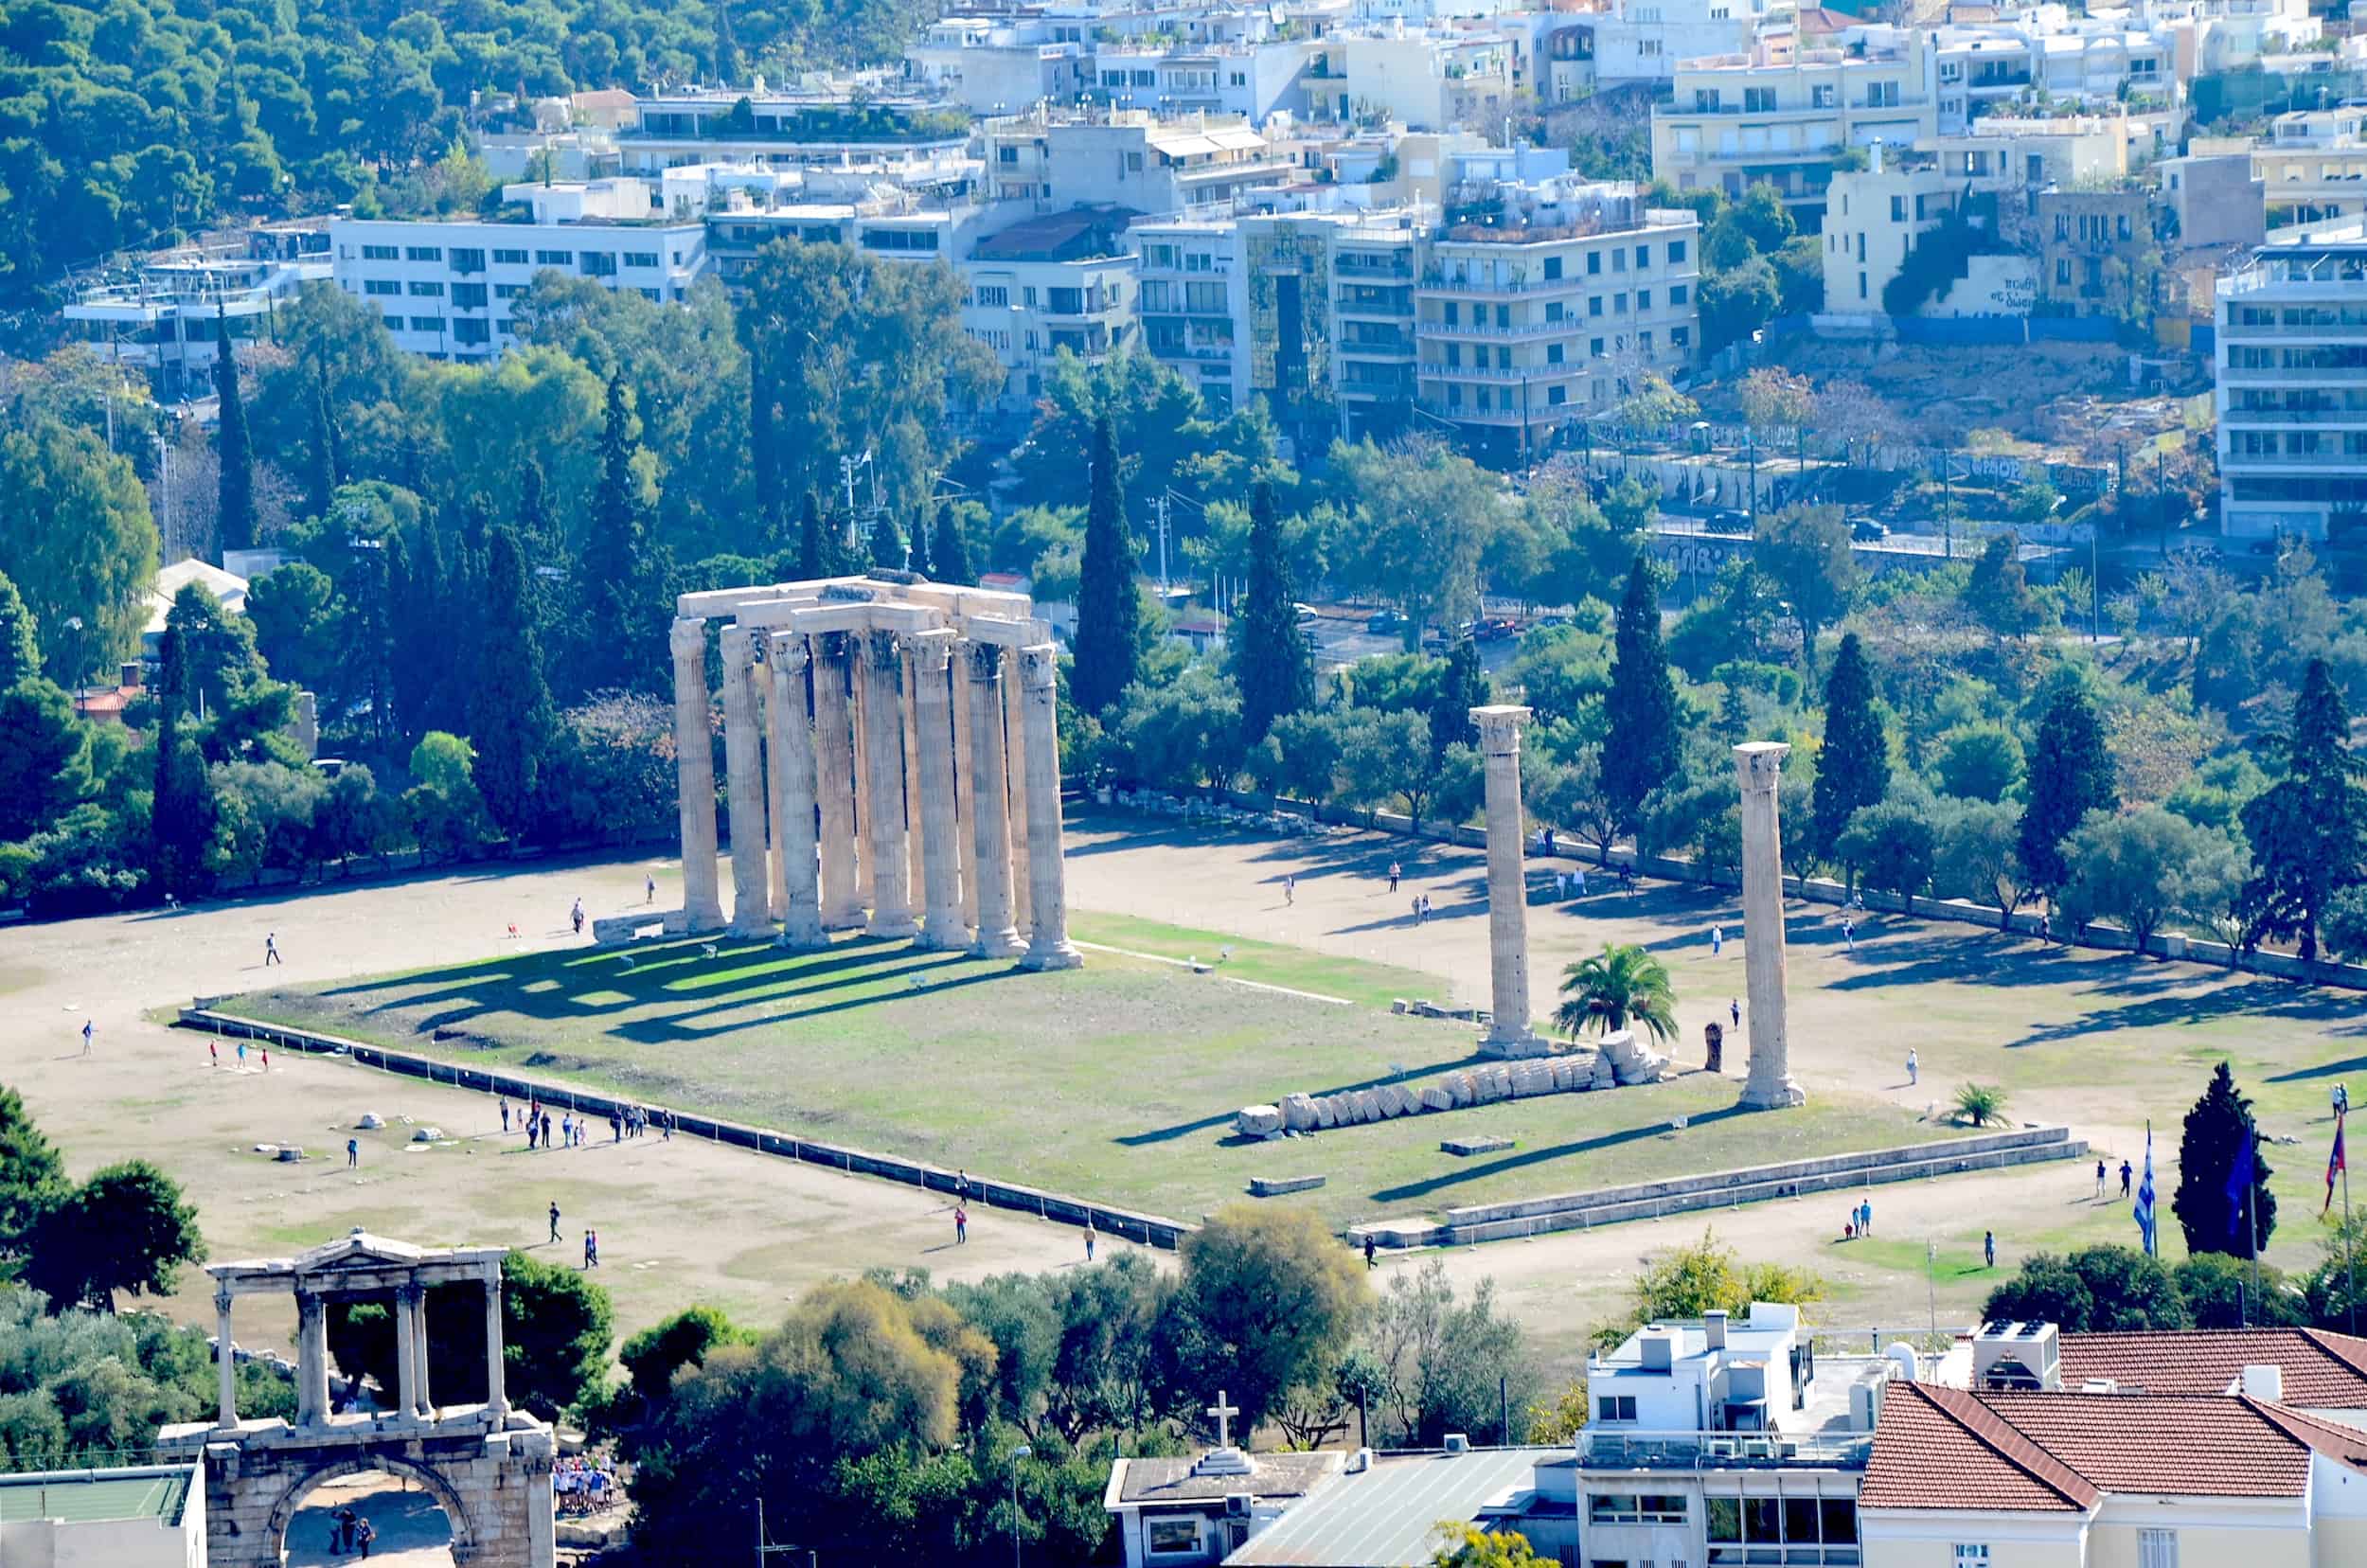 Temple of Olympian Zeus from the Acropolis